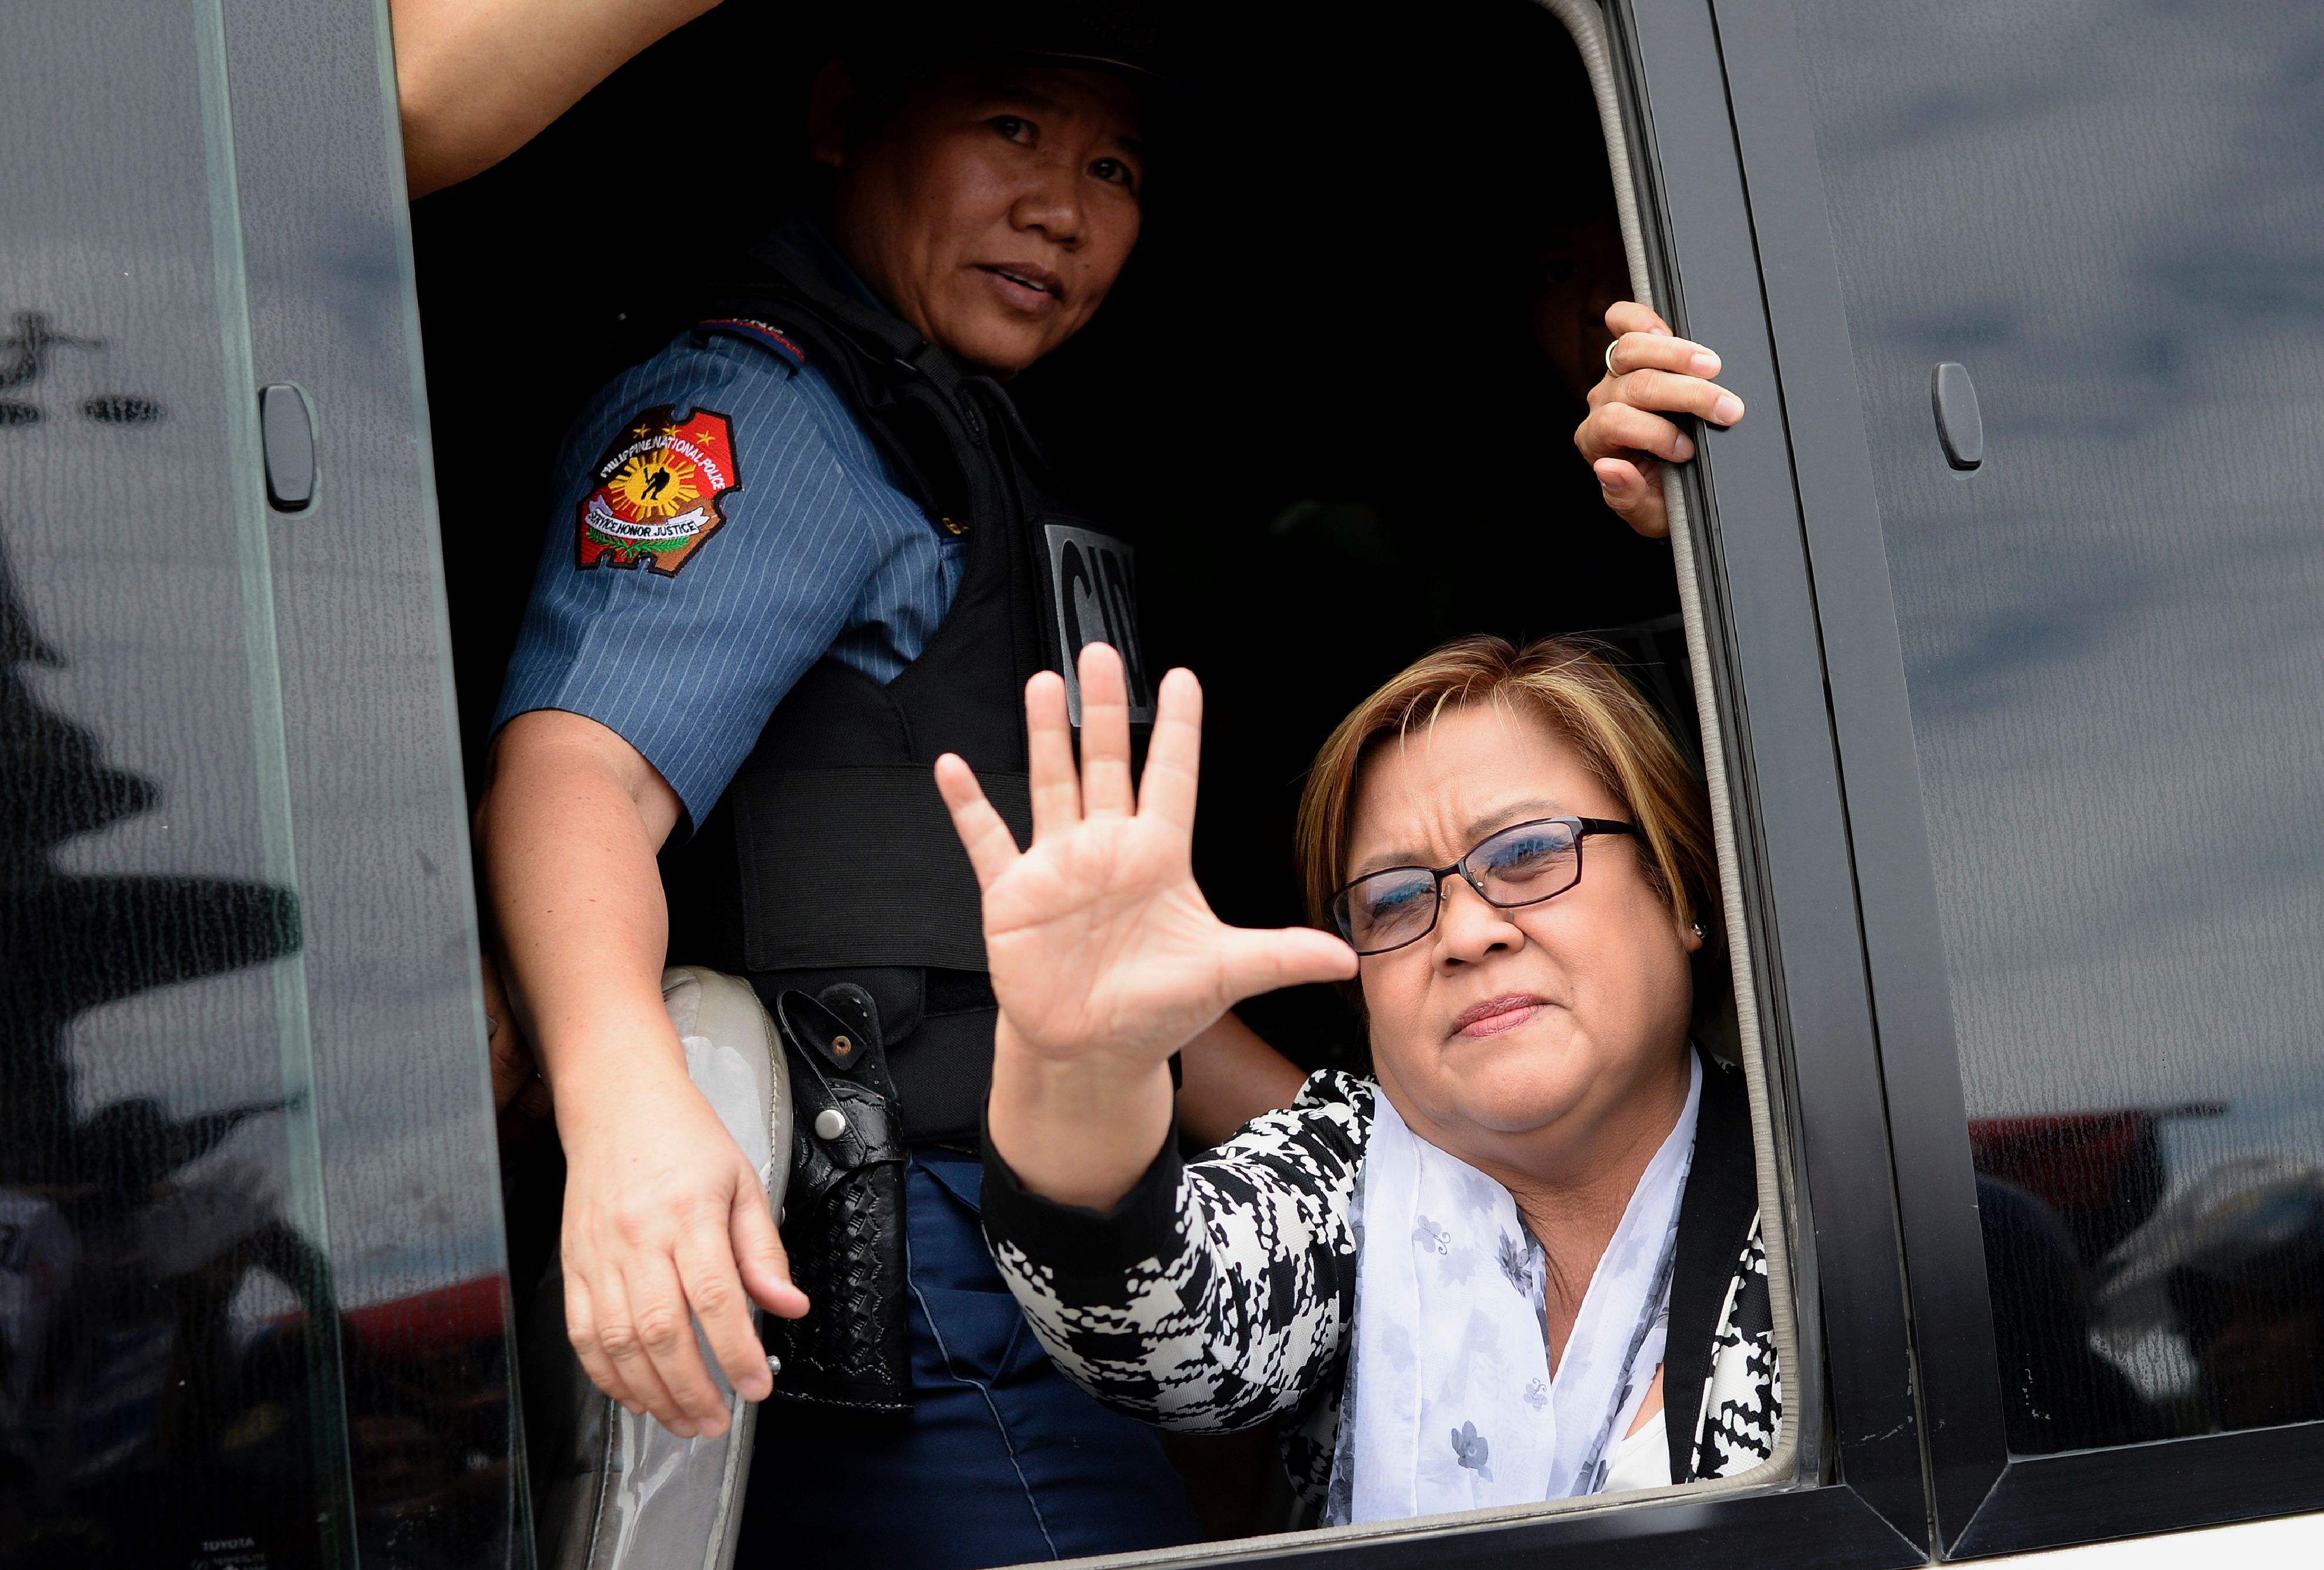 Philippine Senator Leila De Lima waves to her supporters after appearing at a court in Muntinlupa City, suburban Manila on Feb. 24, 2017. (Noel Celis—AFP/Getty Images)